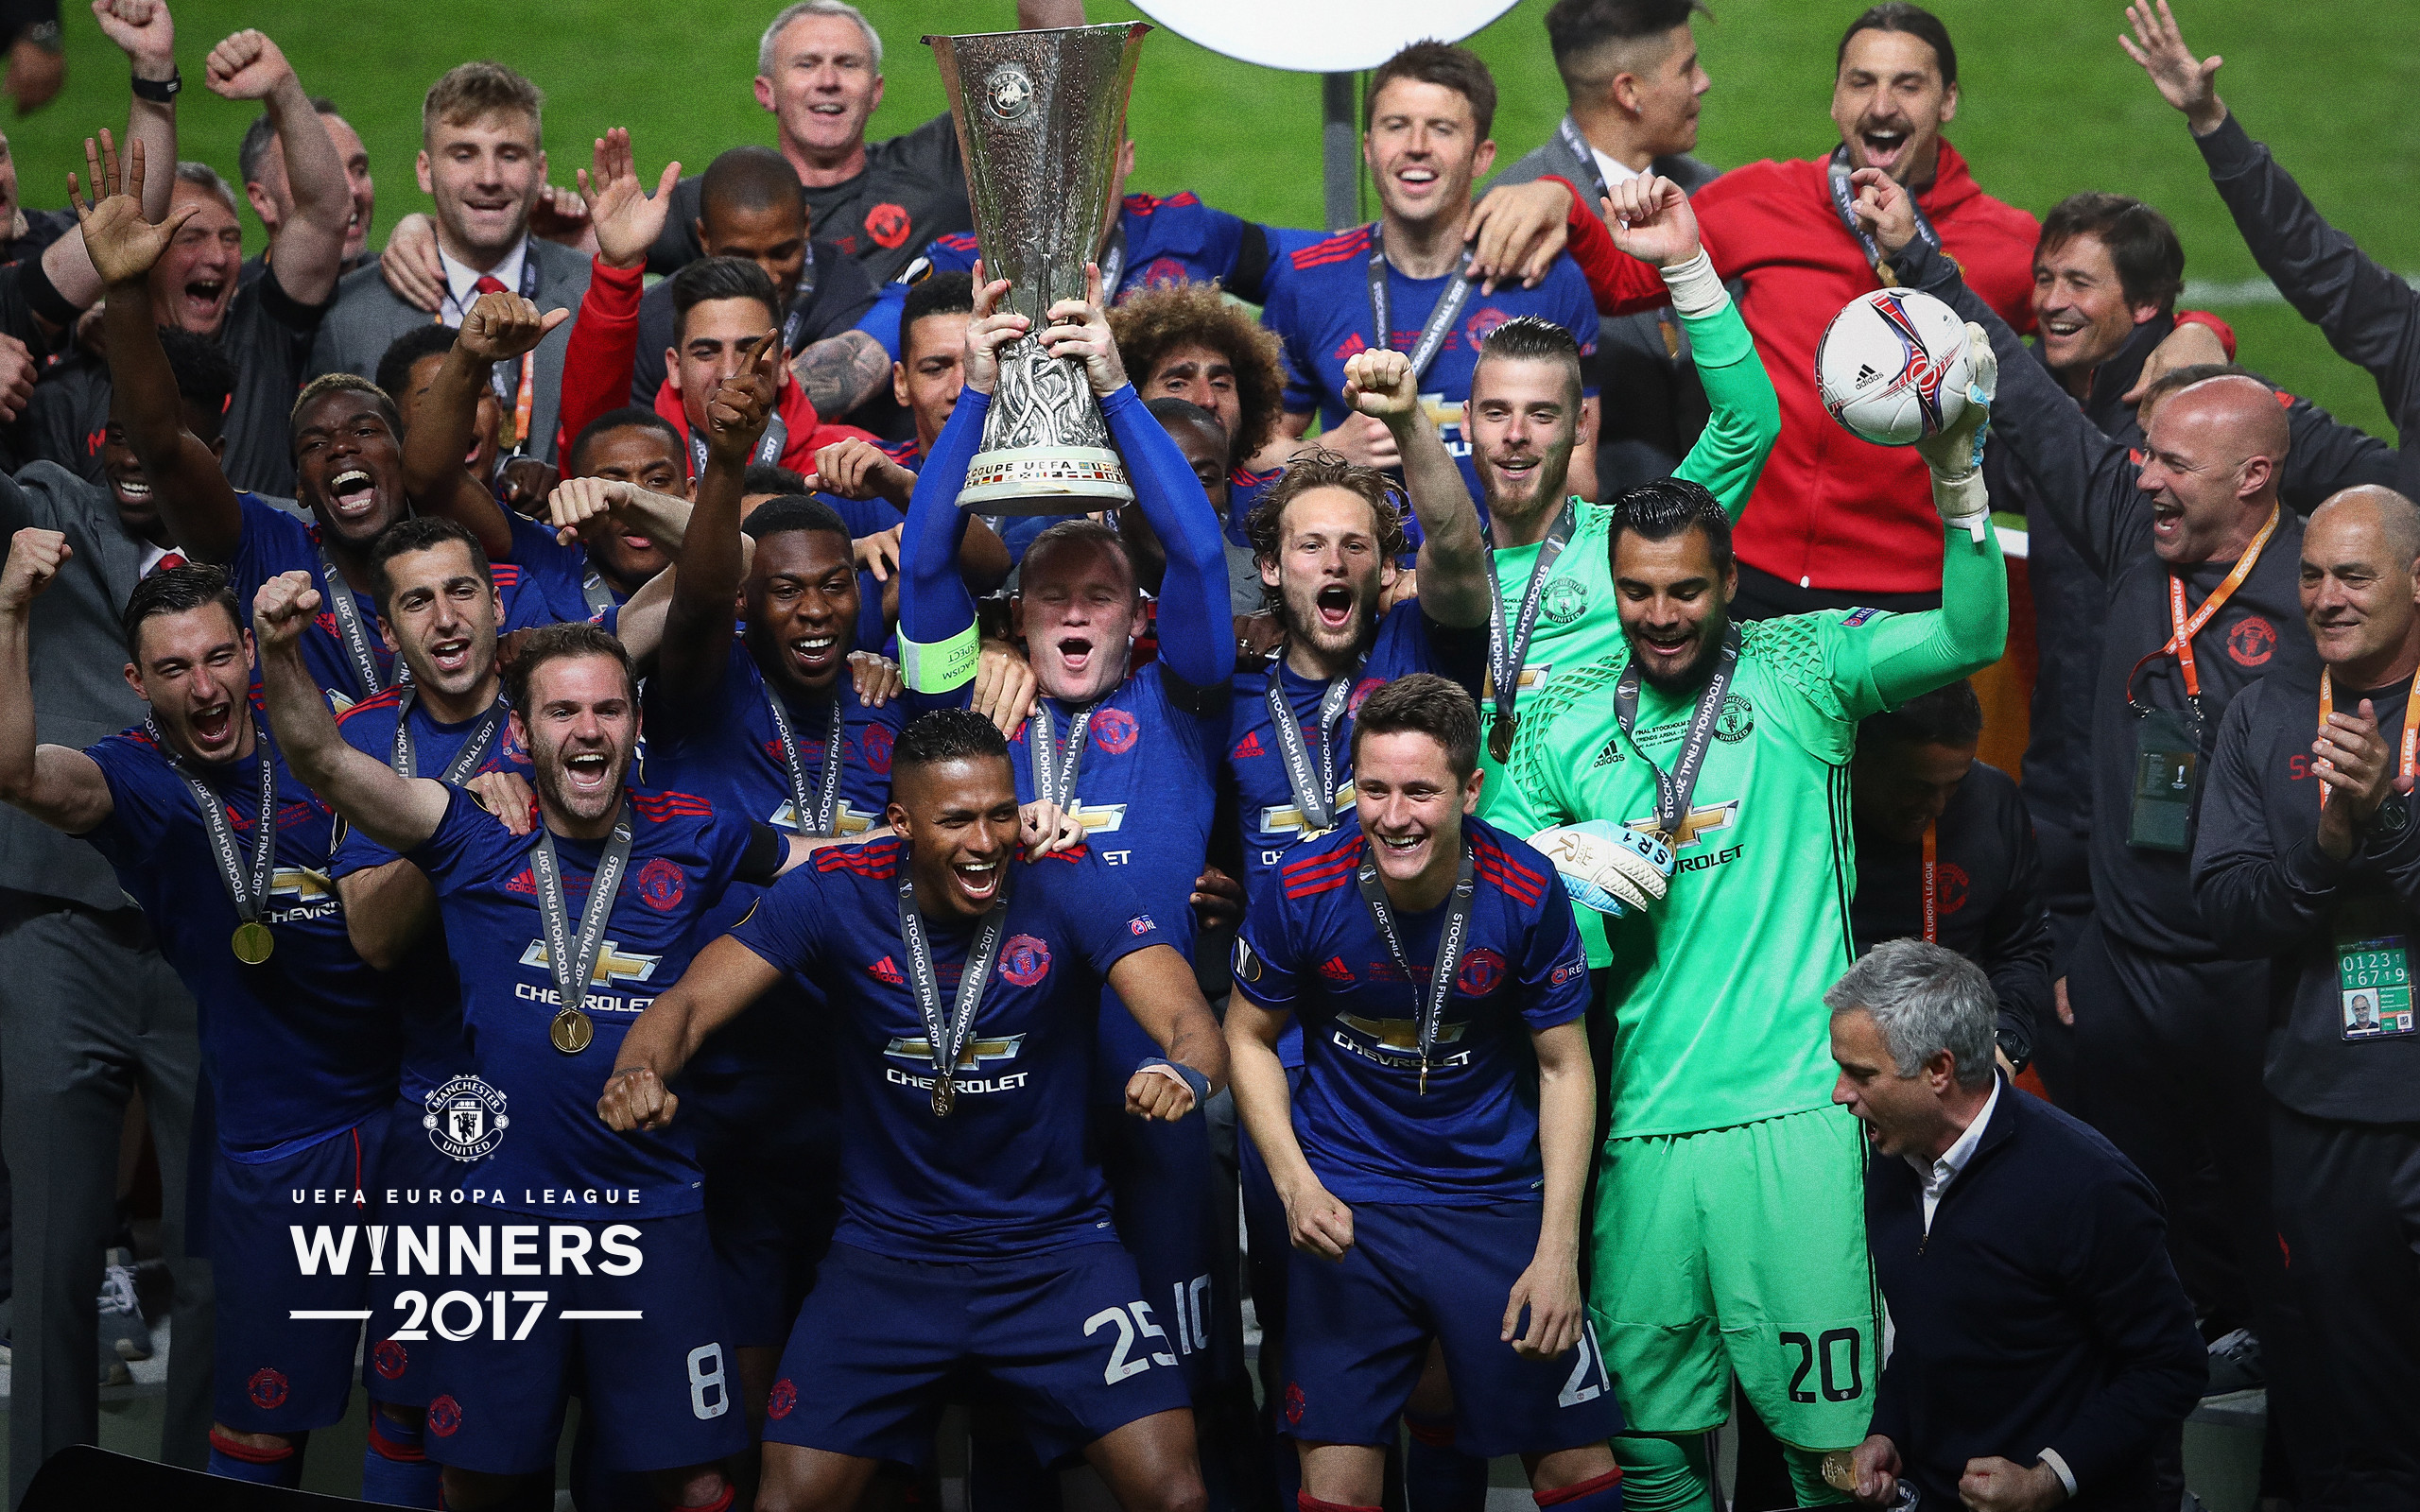 2560x1600 Manchester United win the UEFA Europa League - Official Manchester United  Website